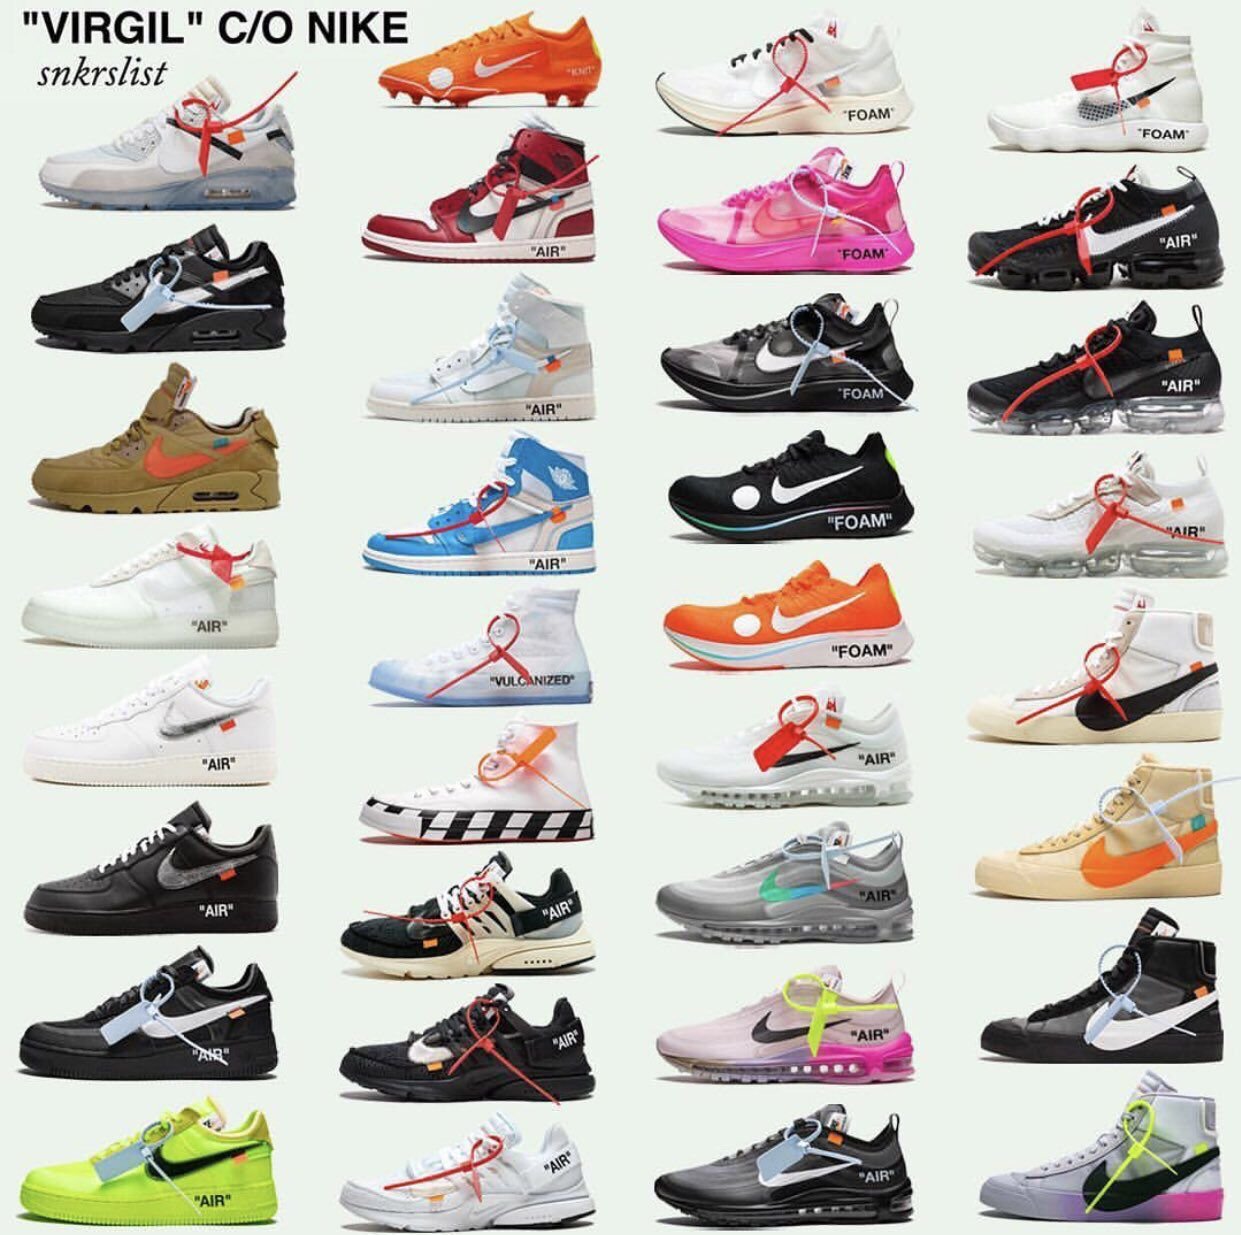 Nike Sneakers collections